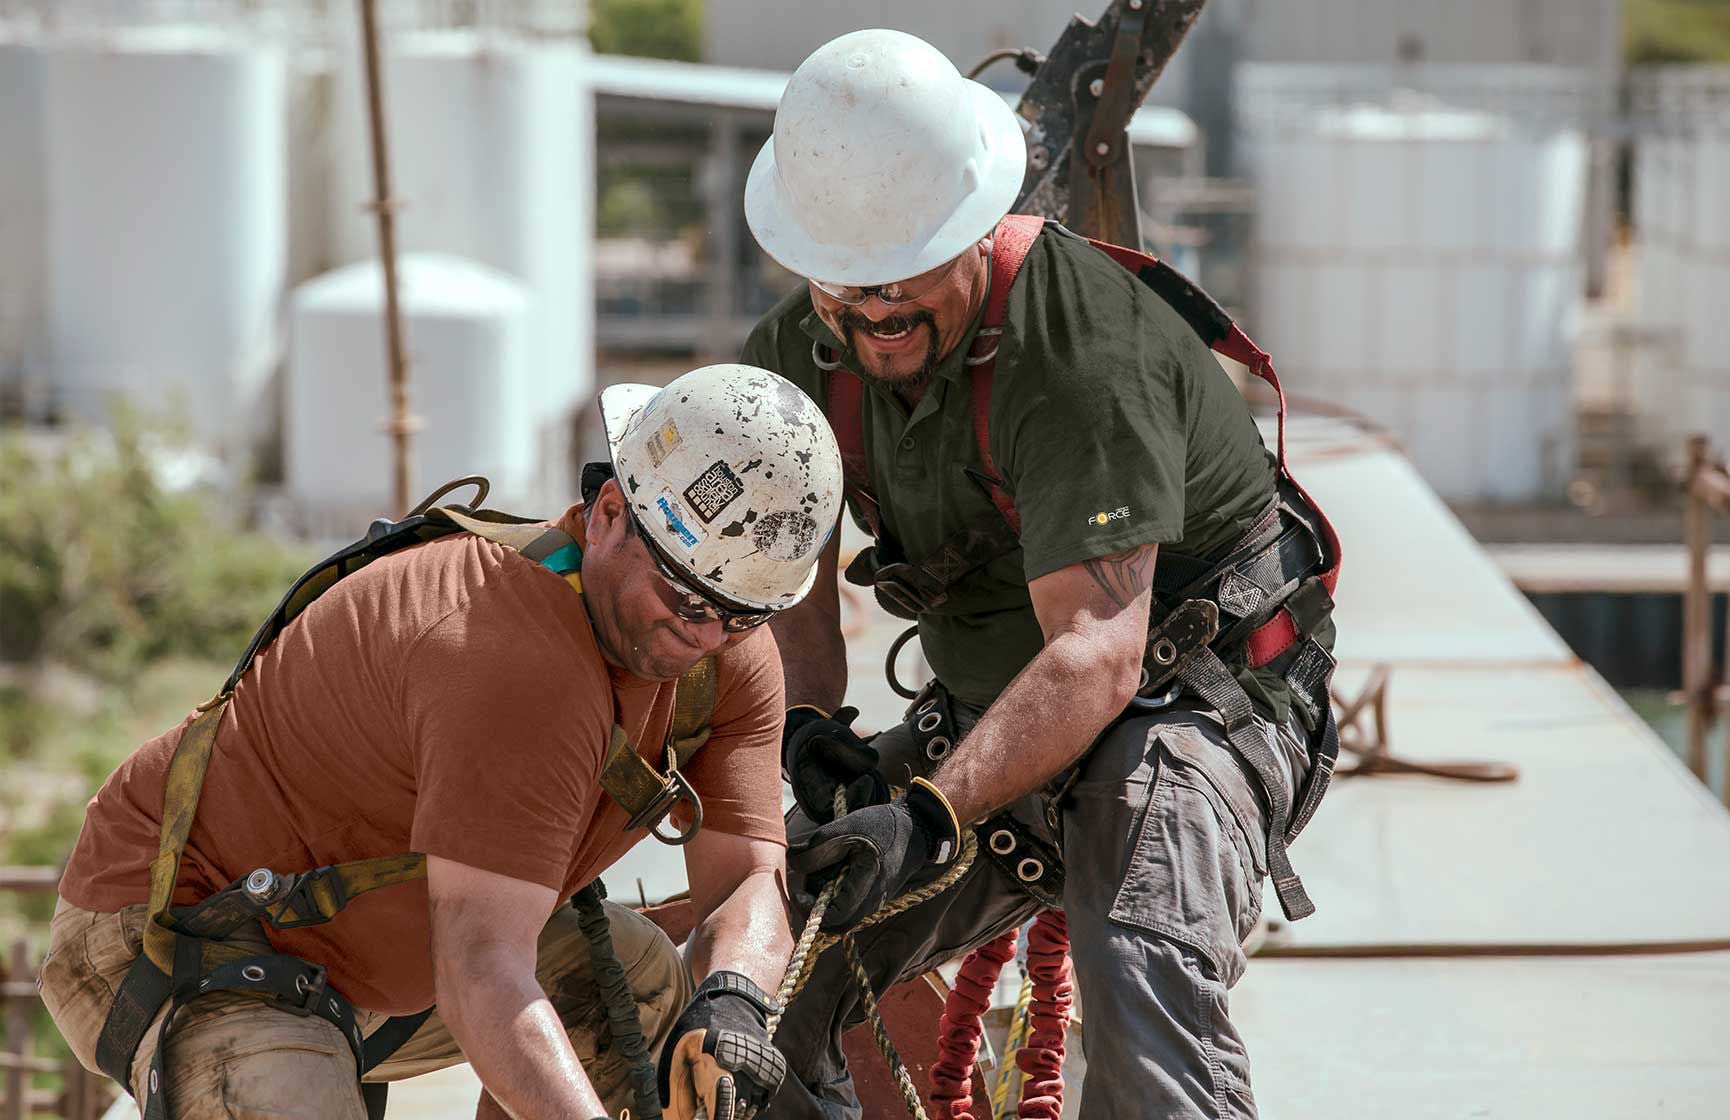 Two construction workers shown pulling on ropes